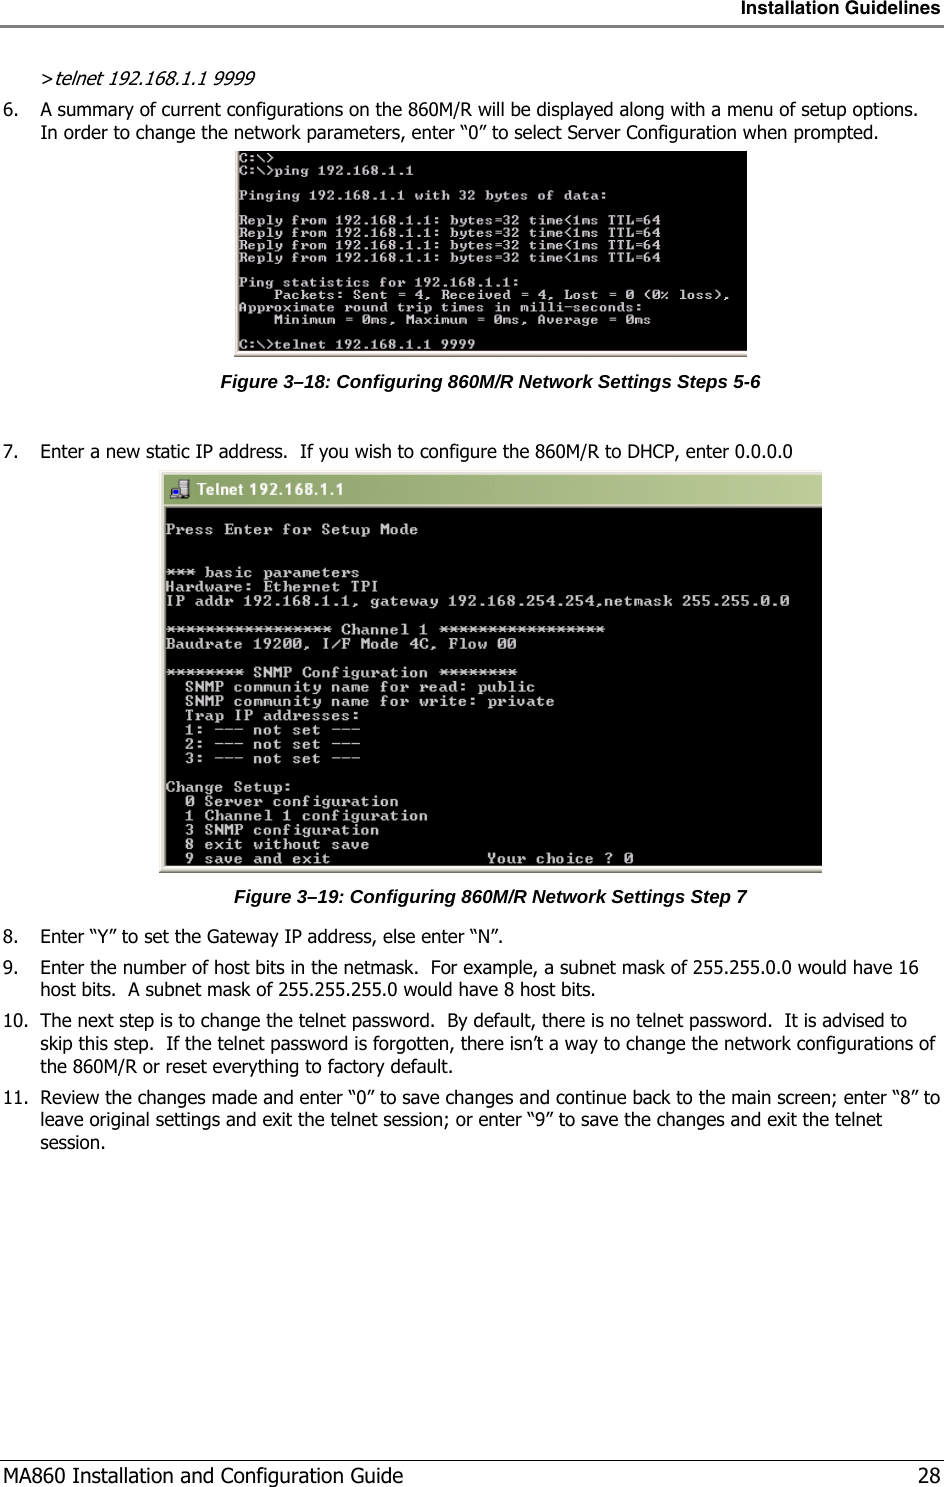 Installation Guidelines  MA860 Installation and Configuration Guide   28 &gt;telnet 192.168.1.1 9999 6. A summary of current configurations on the 860M/R will be displayed along with a menu of setup options.  In order to change the network parameters, enter “0” to select Server Configuration when prompted.  Figure  3–18: Configuring 860M/R Network Settings Steps 5-6  7. Enter a new static IP address.  If you wish to configure the 860M/R to DHCP, enter 0.0.0.0  Figure  3–19: Configuring 860M/R Network Settings Step 7 8. Enter “Y” to set the Gateway IP address, else enter “N”. 9. Enter the number of host bits in the netmask.  For example, a subnet mask of 255.255.0.0 would have 16 host bits.  A subnet mask of 255.255.255.0 would have 8 host bits. 10. The next step is to change the telnet password.  By default, there is no telnet password.  It is advised to skip this step.  If the telnet password is forgotten, there isn’t a way to change the network configurations of the 860M/R or reset everything to factory default. 11. Review the changes made and enter “0” to save changes and continue back to the main screen; enter “8” to leave original settings and exit the telnet session; or enter “9” to save the changes and exit the telnet session. 